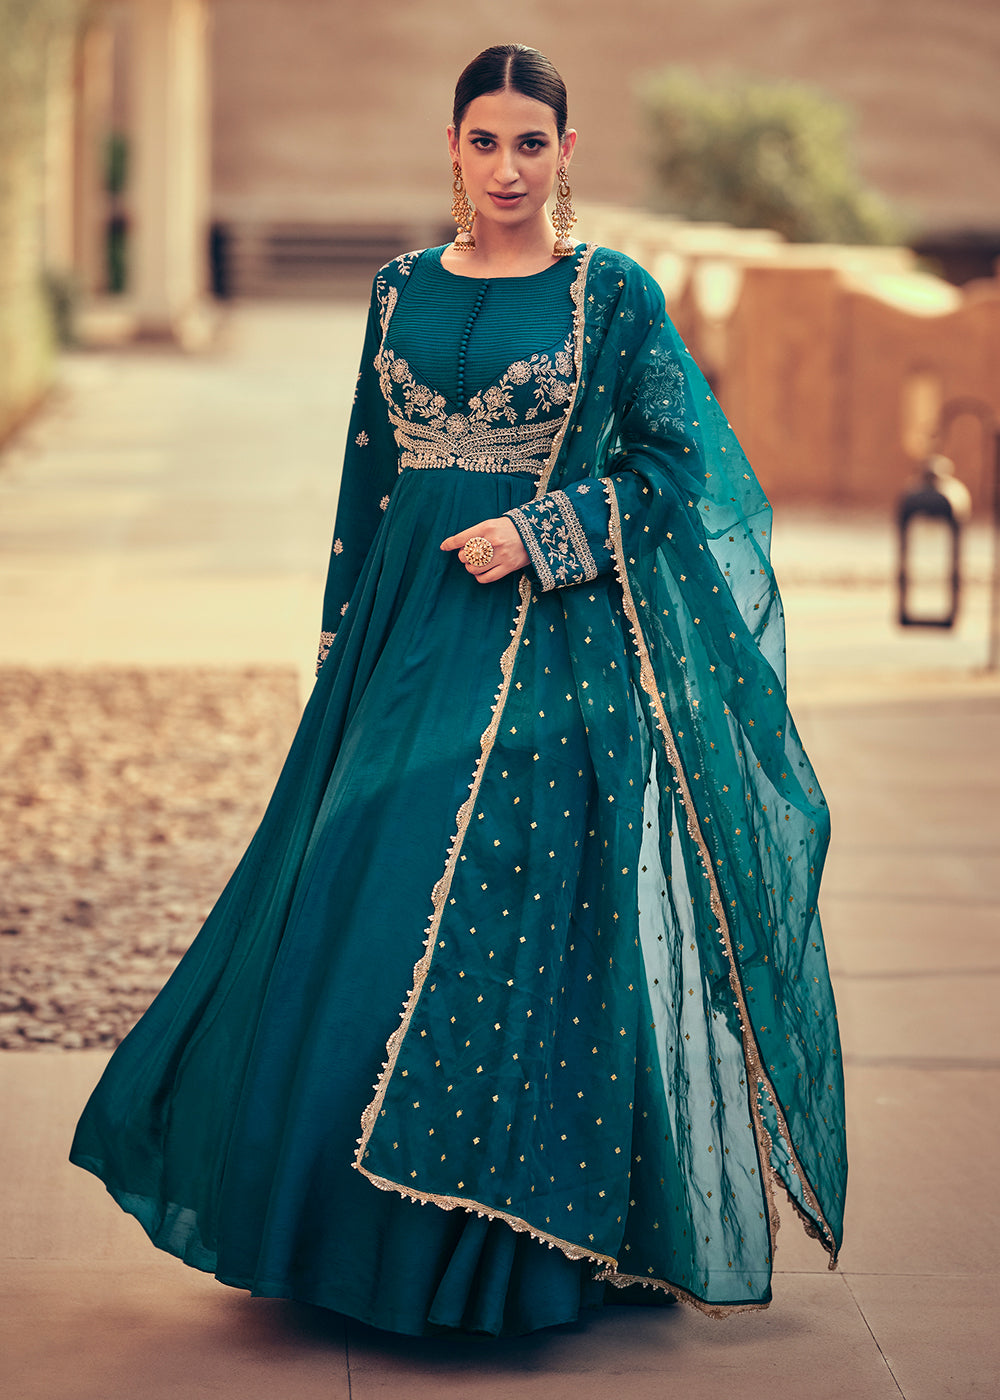 Buy Now Festive Style Teal Blue Embroidered Silk Anarkali Suit Online in USA, UK, Australia, New Zealand, Canada & Worldwide at Empress Clothing.